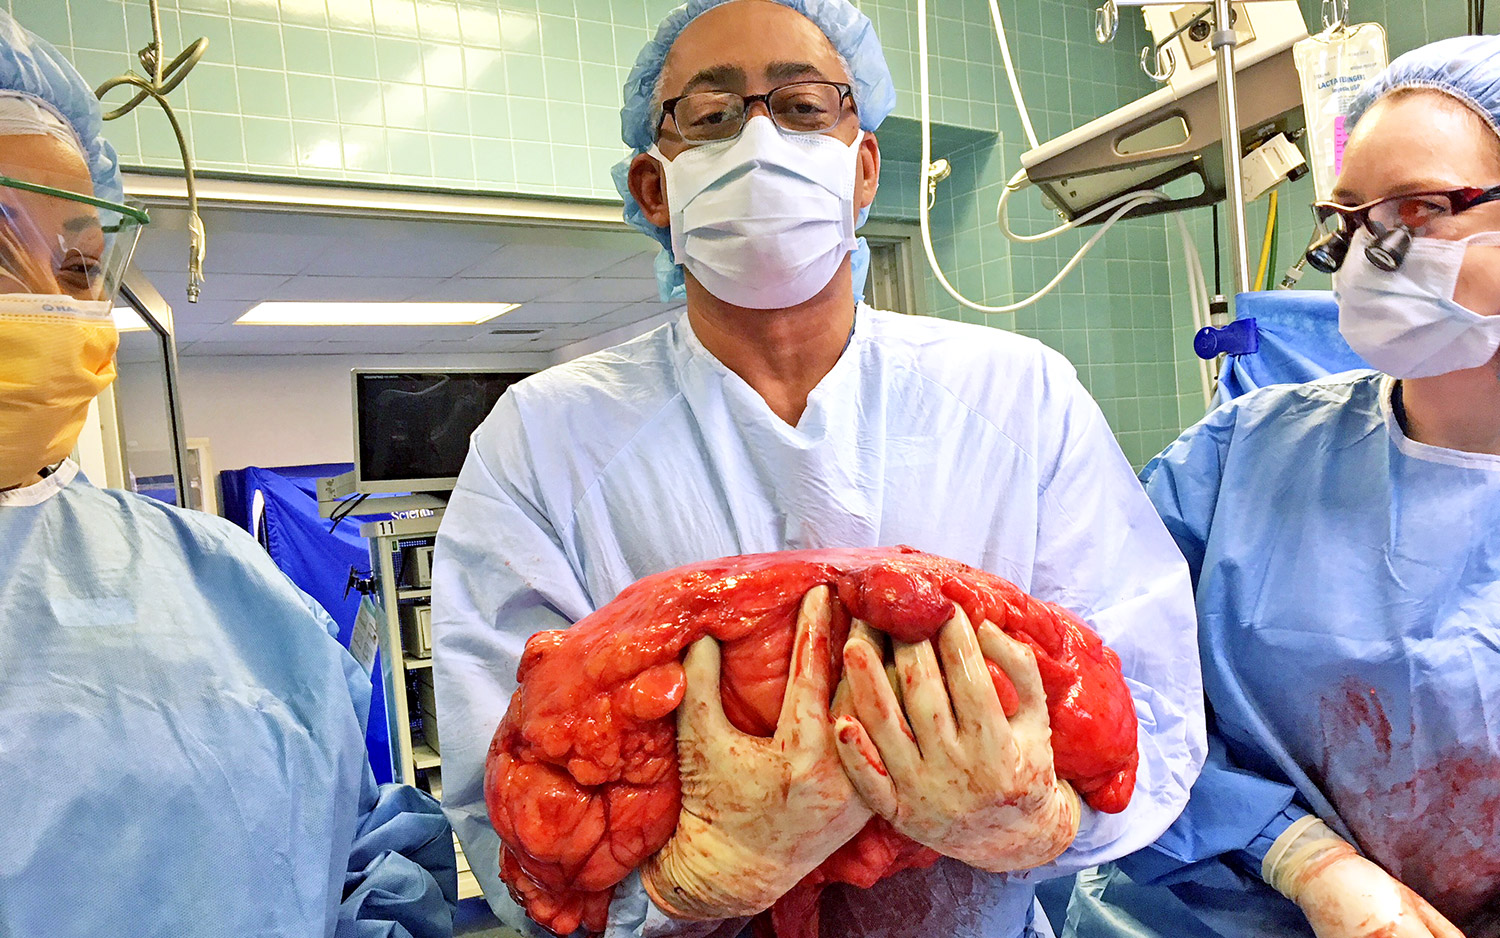 A Man's 'Beer Belly' Was Actually a Massive Tumor | Live Science